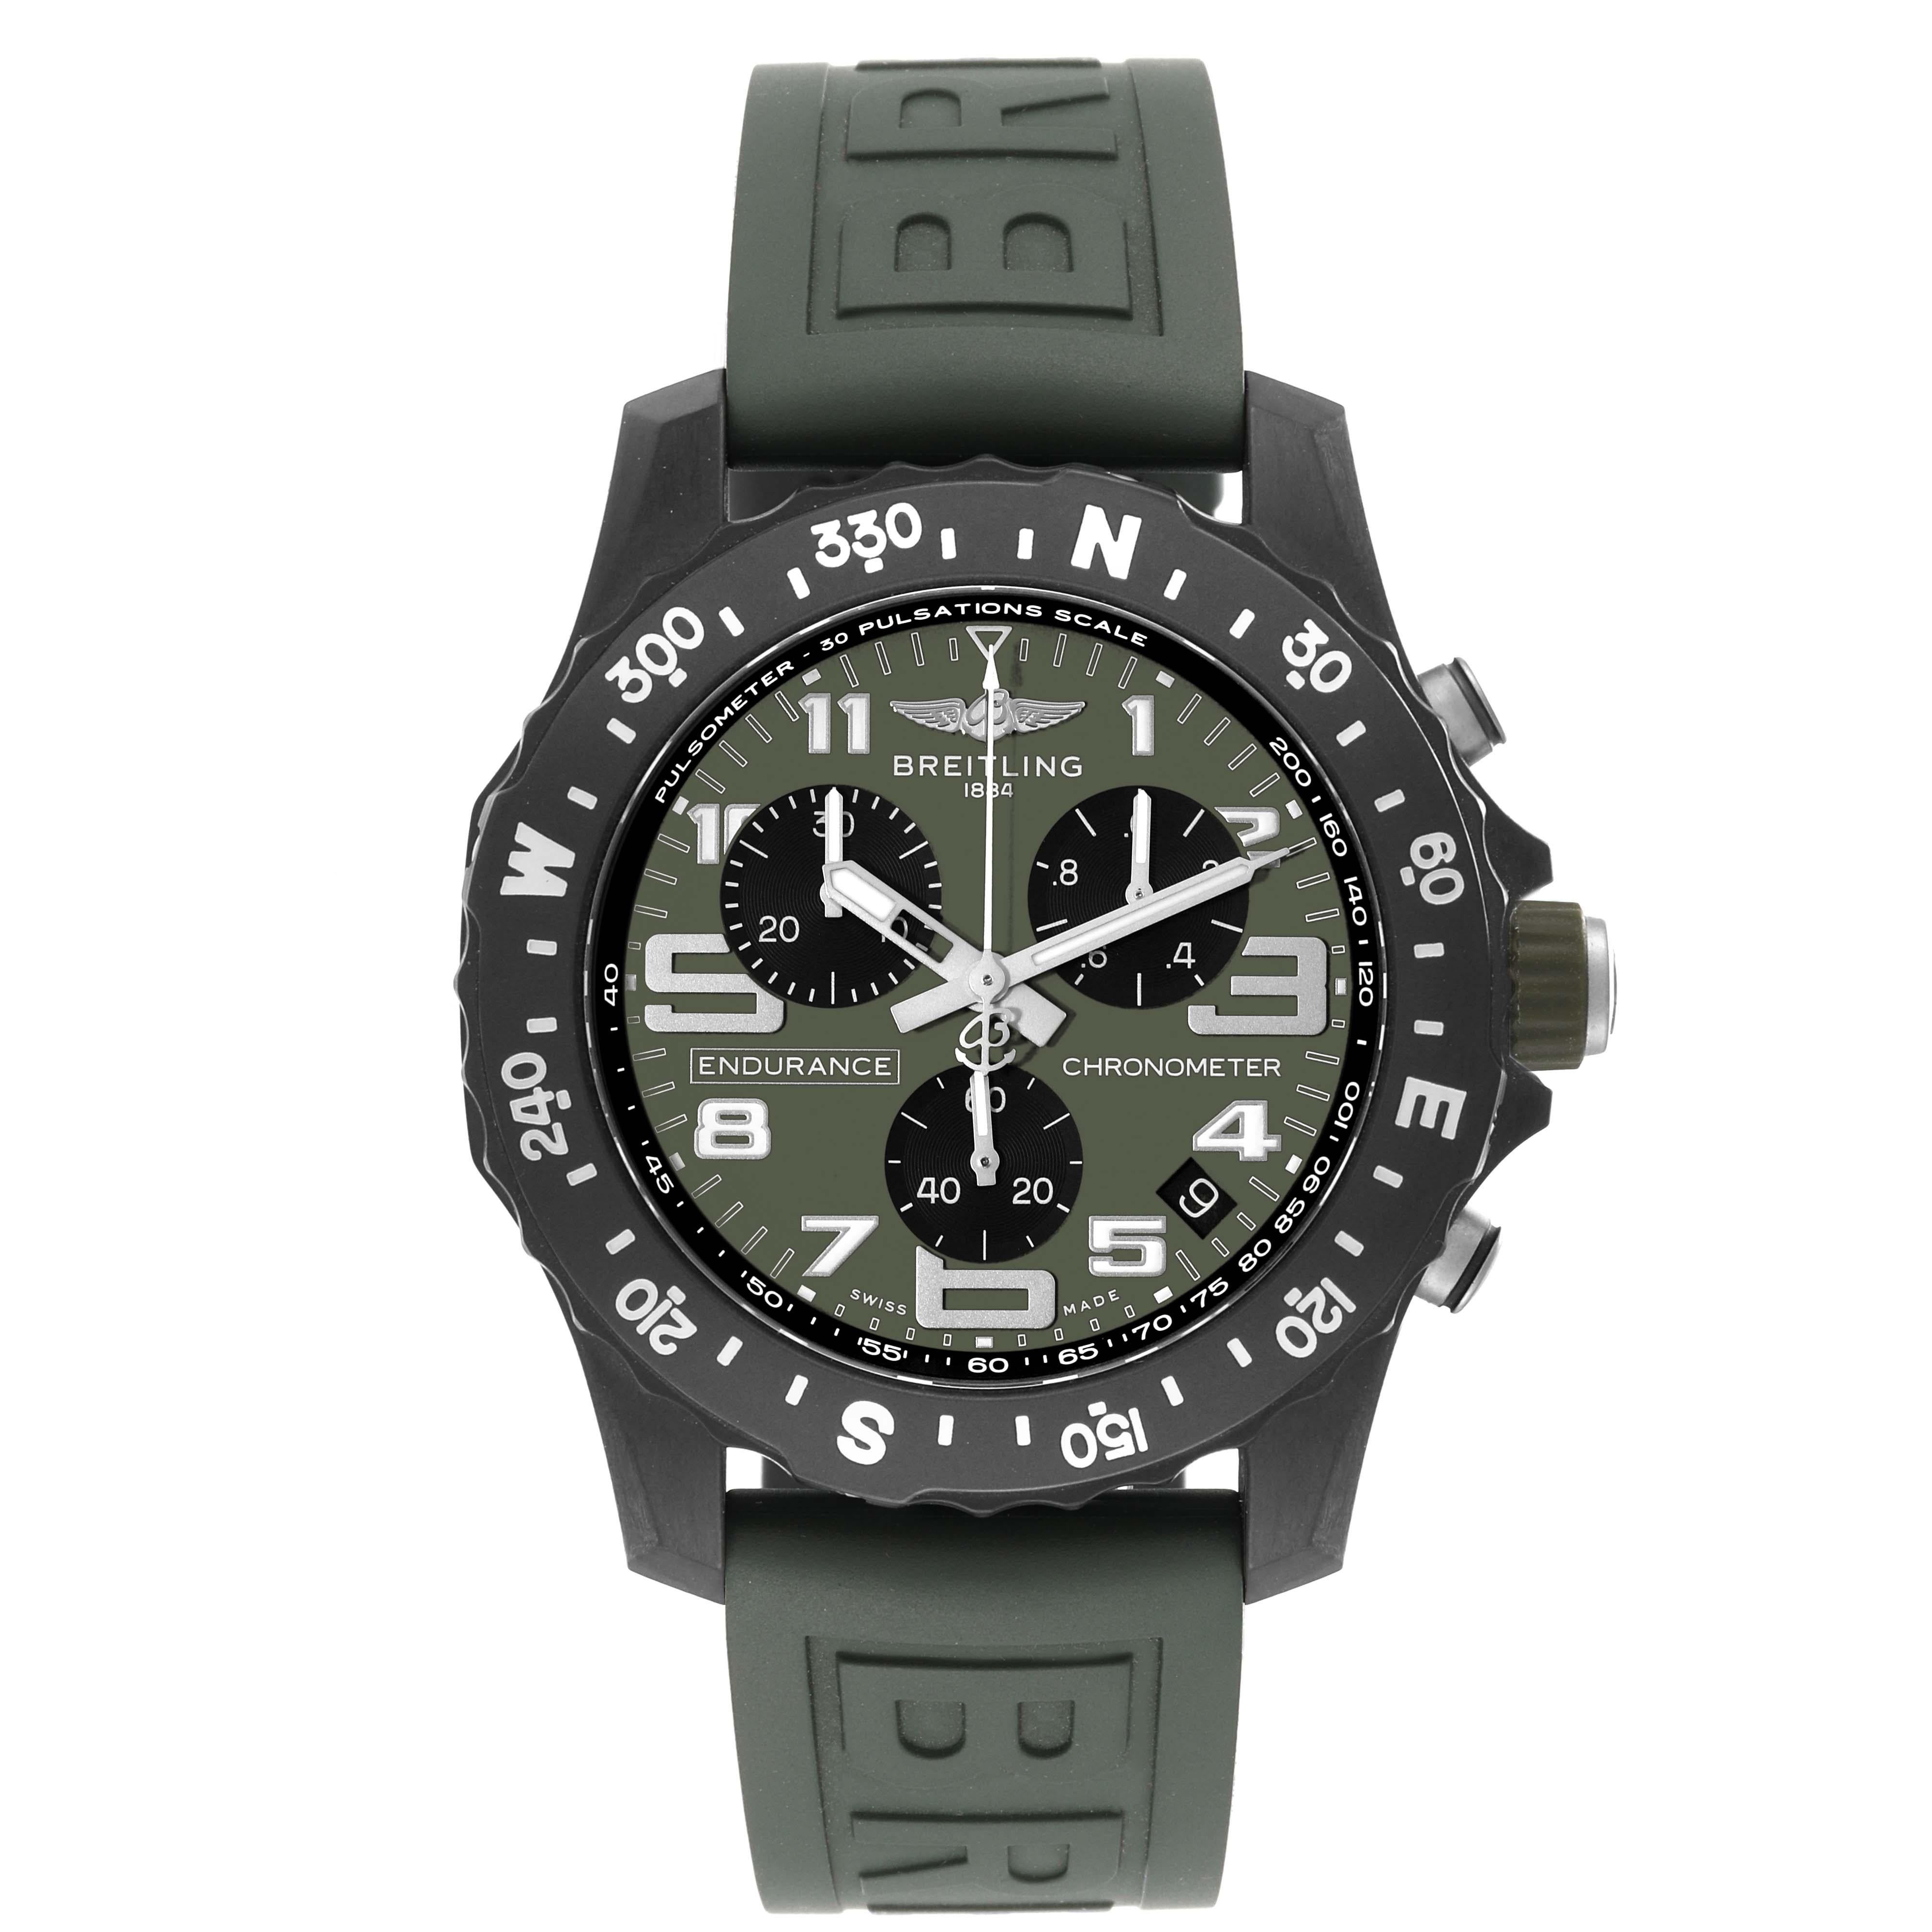 Breitling Endurance Pro Green Breitlight Mens Watch X82310. COSC-certified quartz chronograph movement. Breitlight polymer case 44 mm in diameter. Case thickness 12.5 mm. Green rubberized crown signed with the Breitling logo. Breitlight